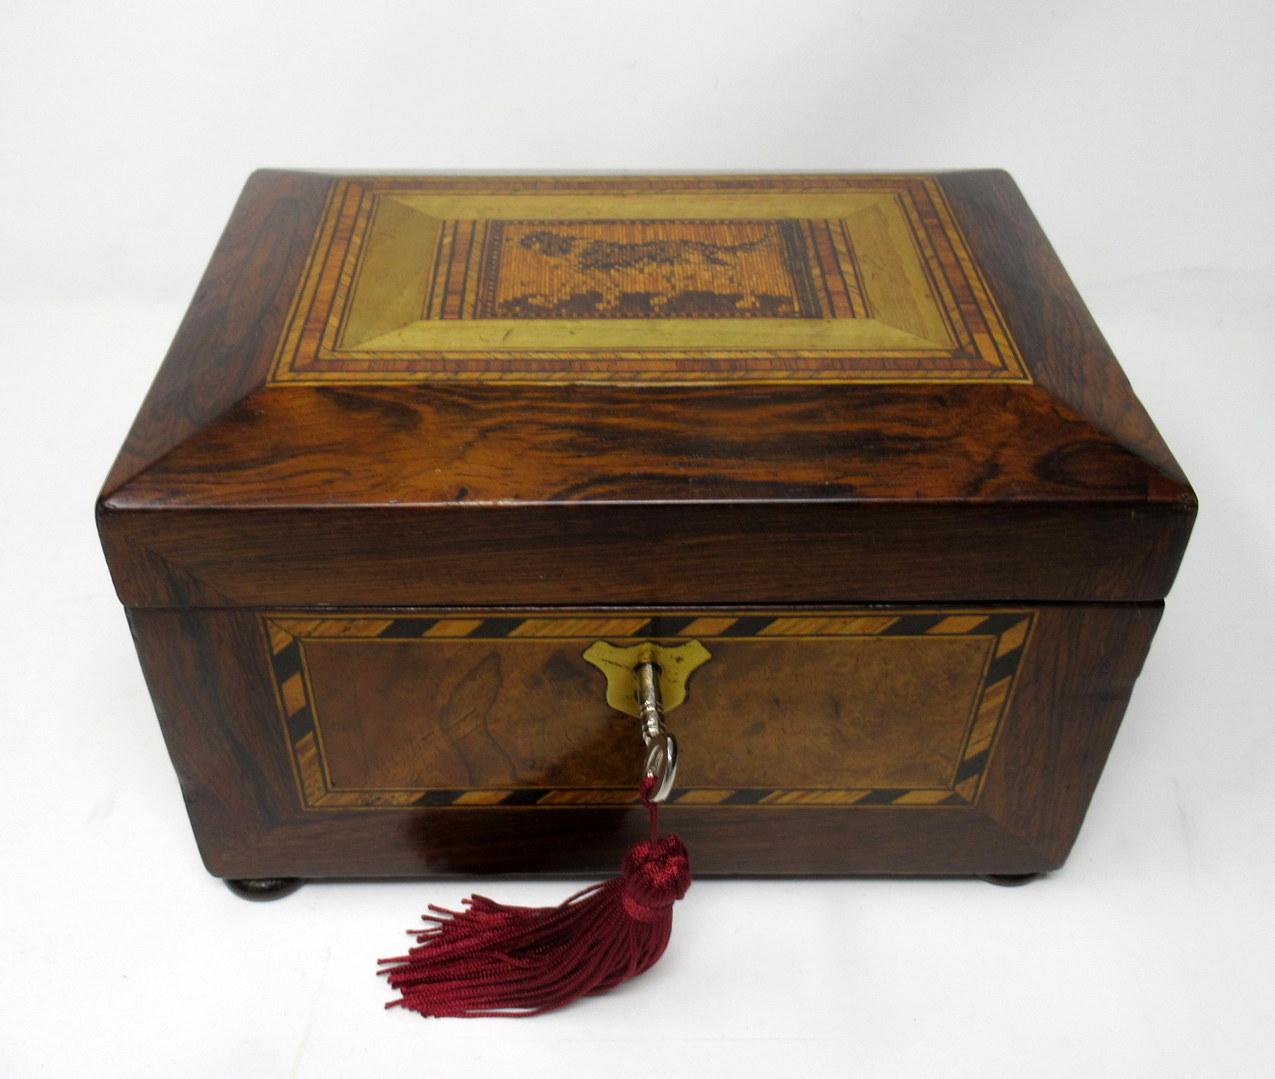 Fine quality Tunbridge ware micro mosiac well figured mahogany early Victorian double tea caddy, with good rich color and patination. Complete with original fitted interior, circa 1850.

The arched hinged lid with a rectangular central reserve